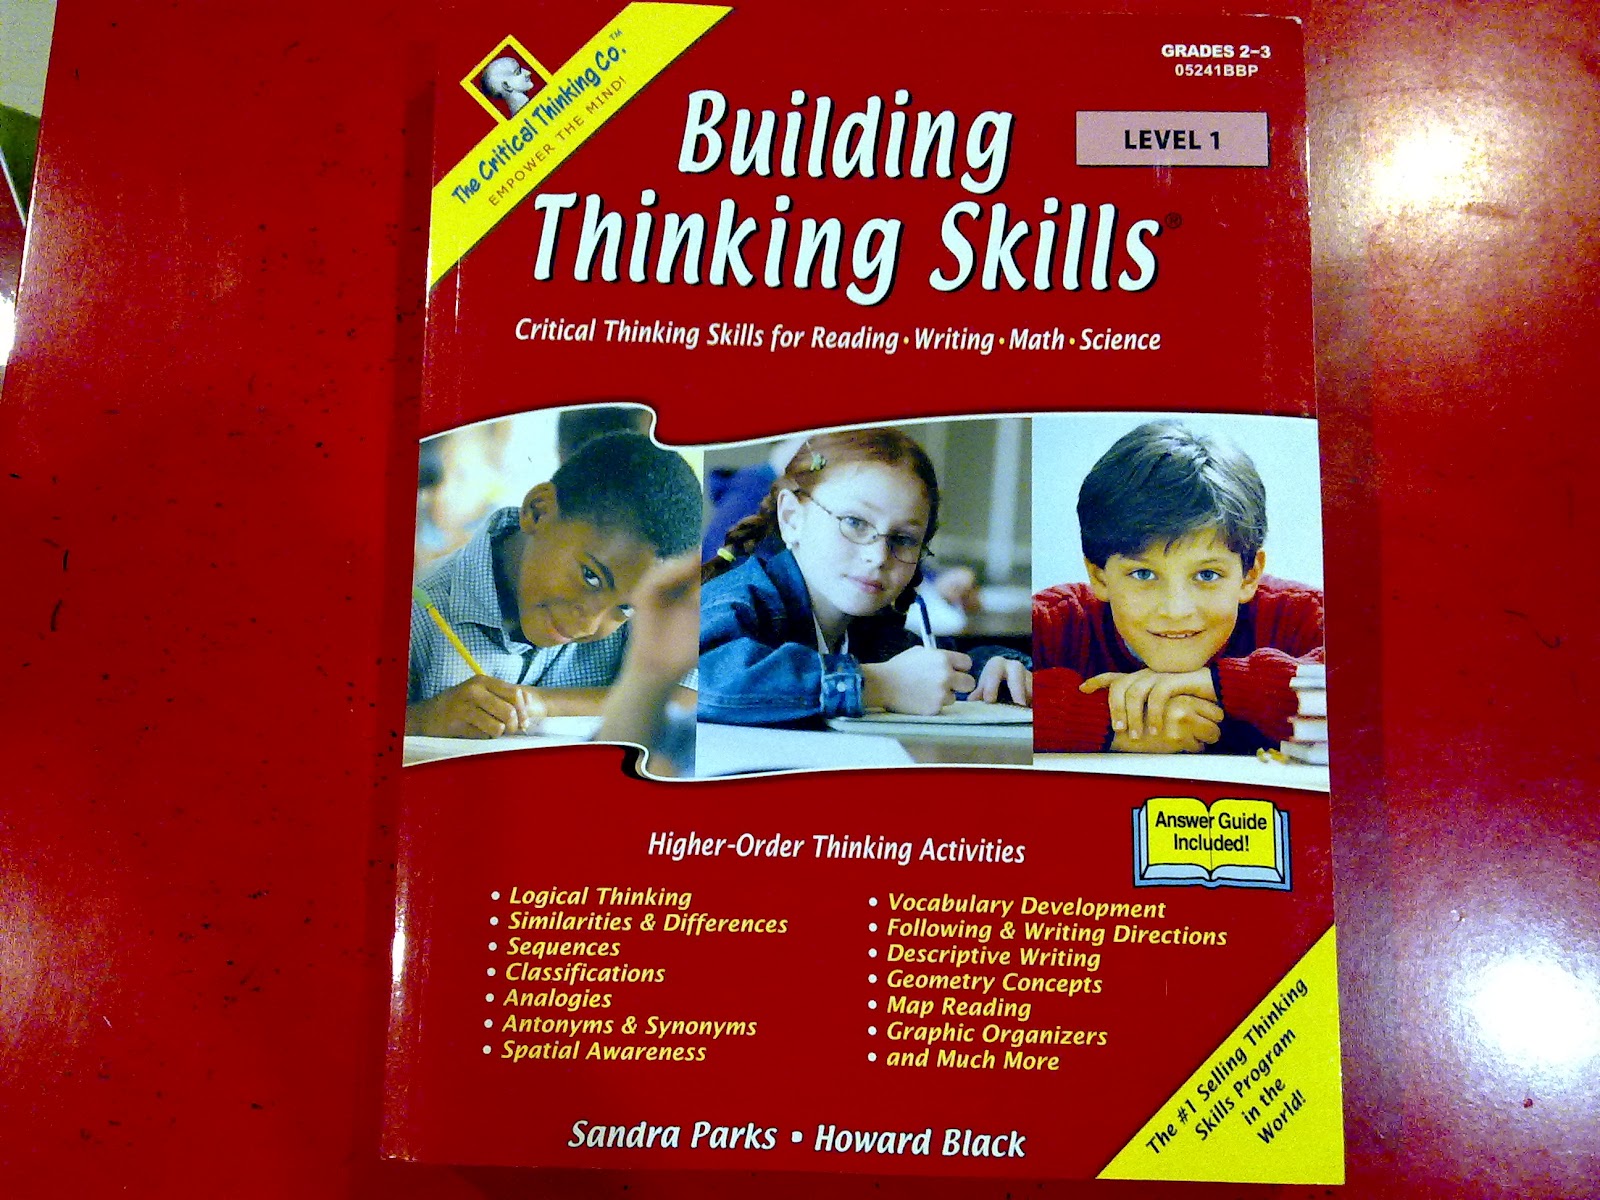 Building thinking skills critical thinking skills for reading writing math science level 2